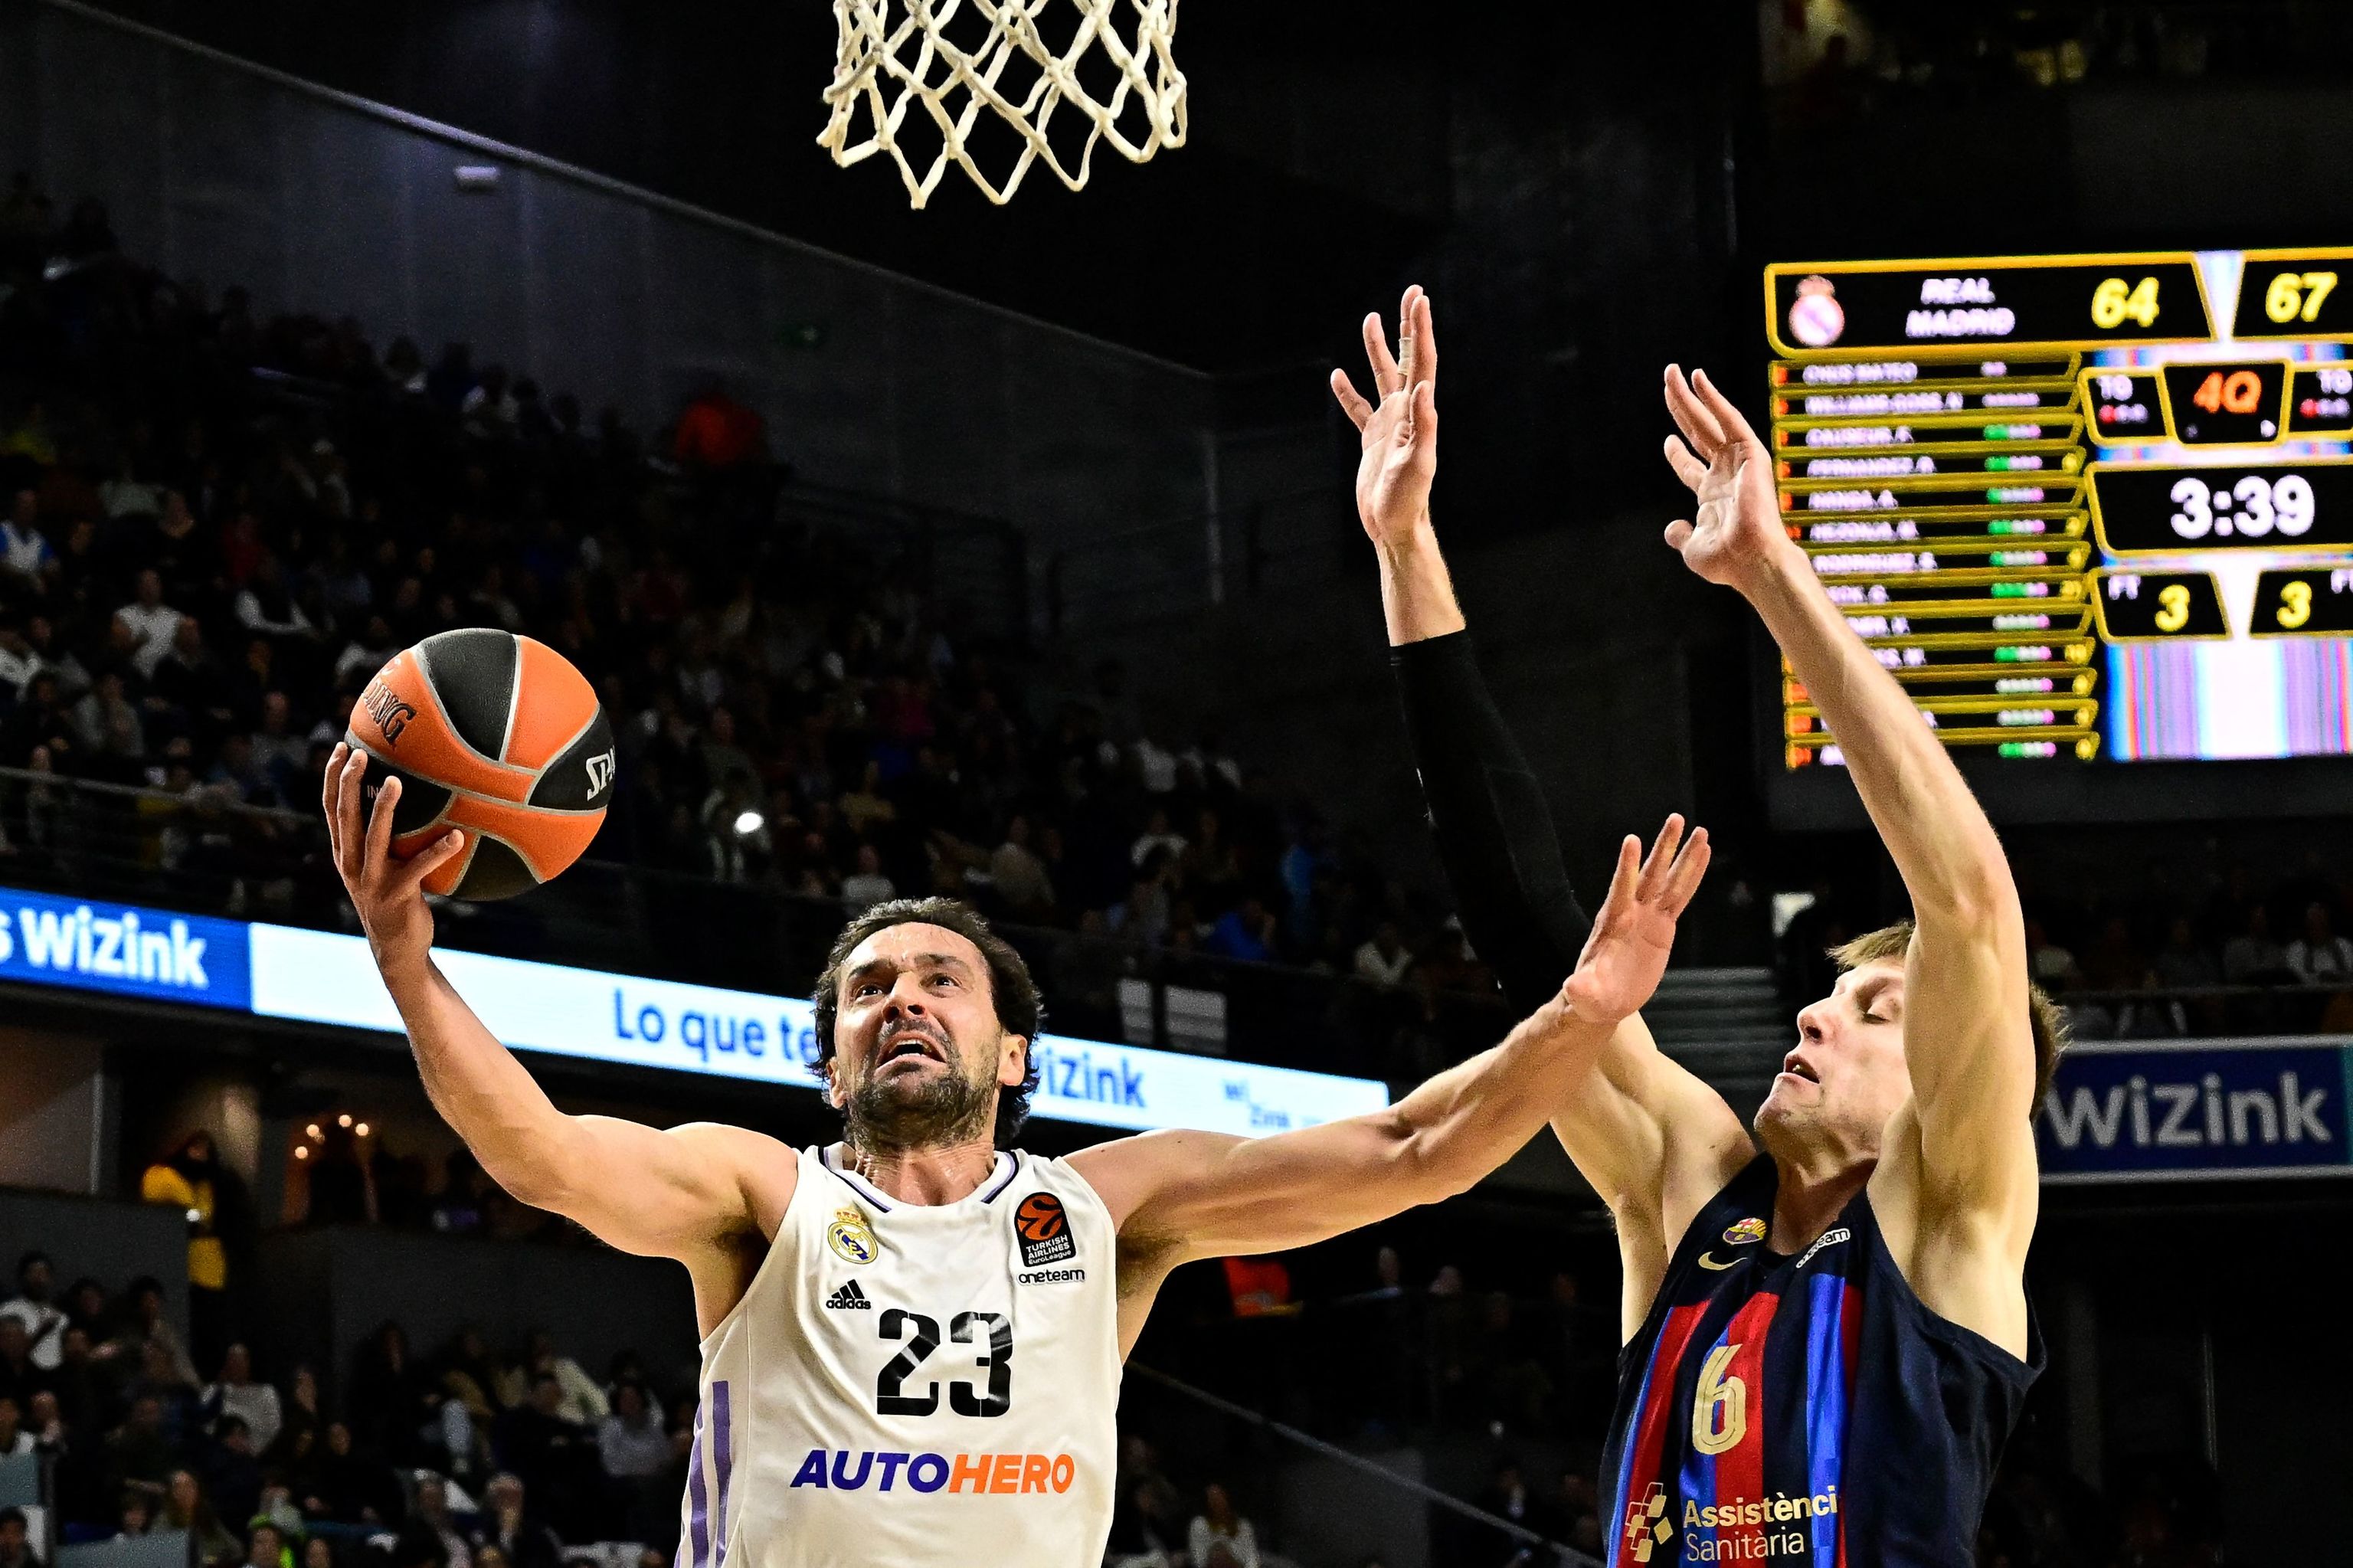 Real Madrid's Spanish guard Sergio  lt;HIT gt;Llull lt;/HIT gt; (L) jumps with the ball next to Barcelona's Czech pivot Jan Vesely during the Euroleague Basketball match between Real Madrid and FC Barcelona at the WiZink centre in Madrid, on January 26, 2023. (Photo by JAVIER SORIANO / AFP)